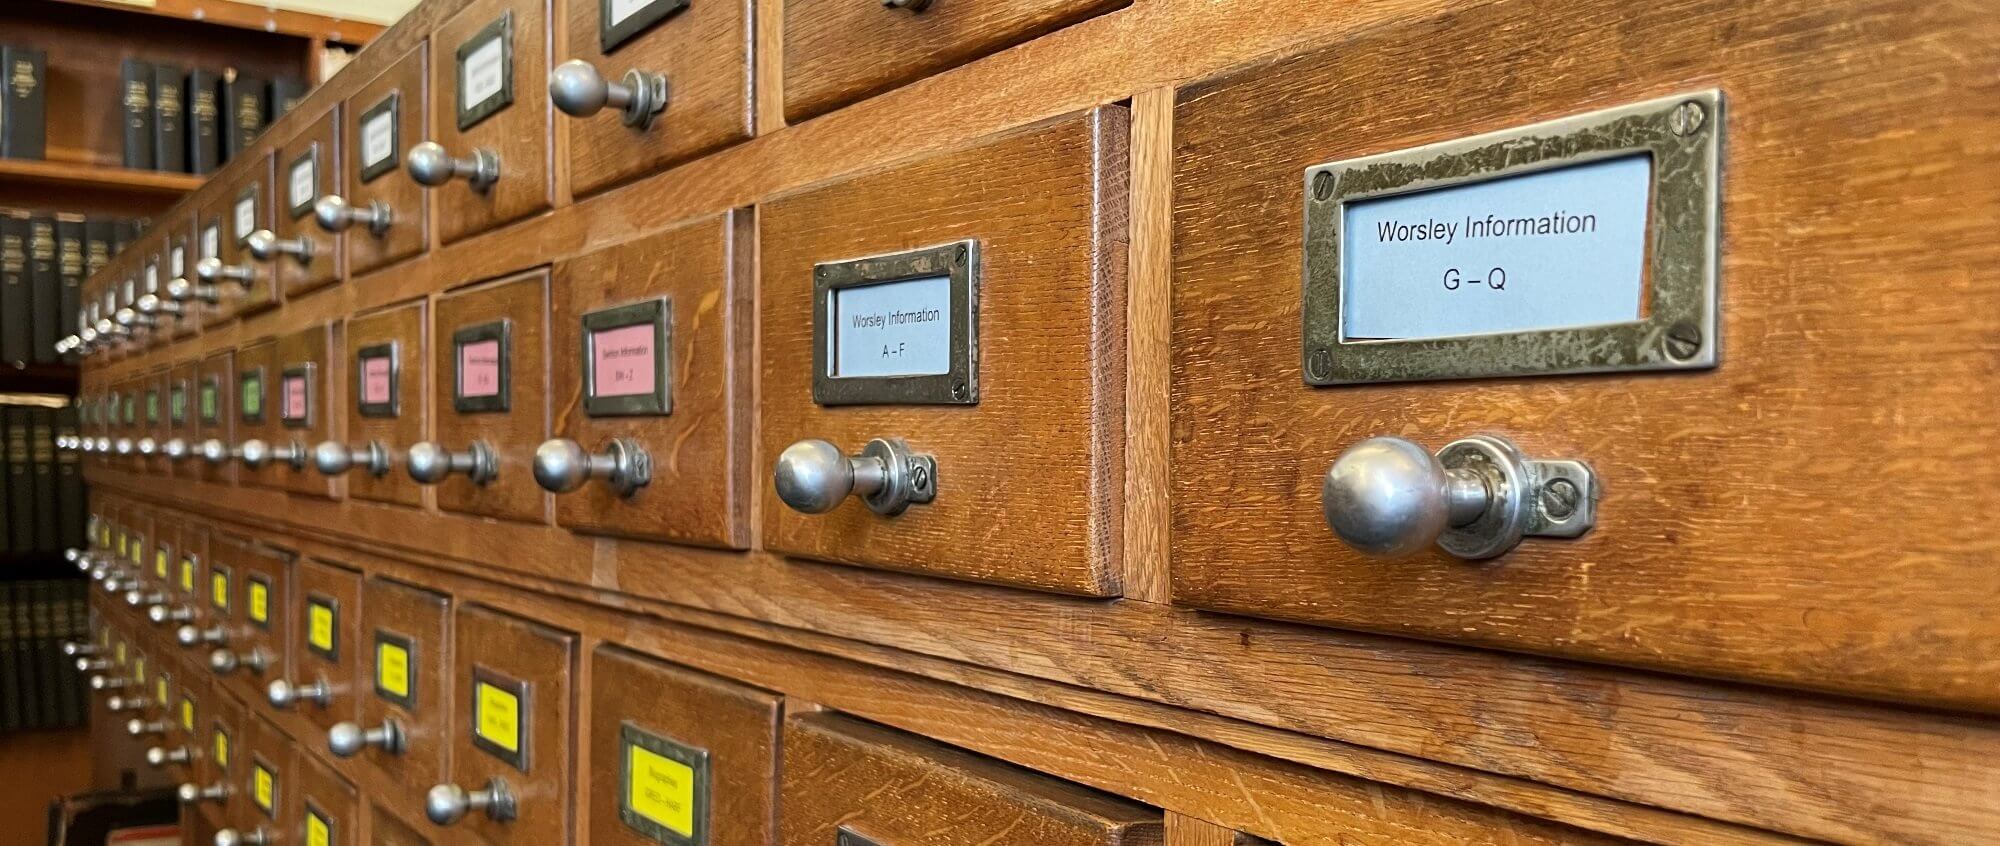 Index card drawers from the library